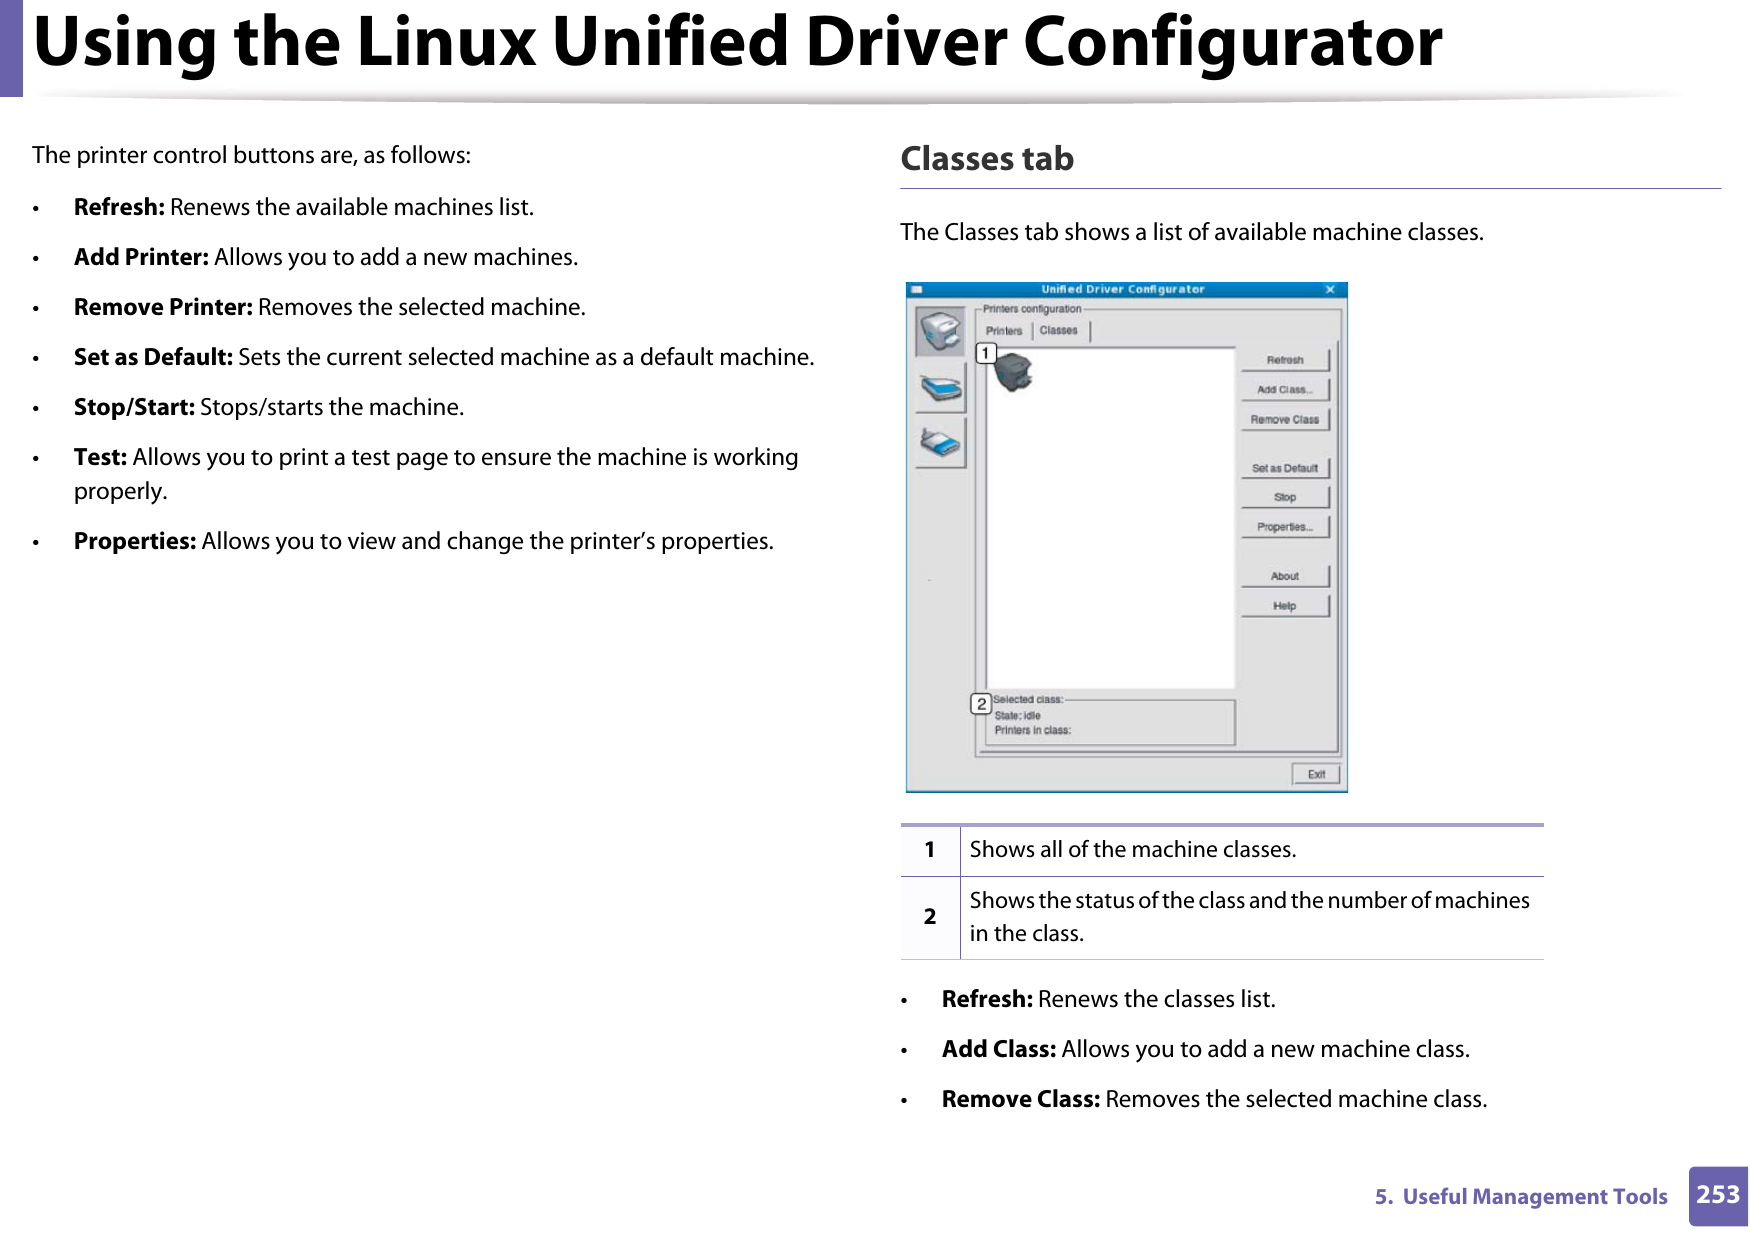 Using the Linux Unified Driver Configurator2535.  Useful Management ToolsThe printer control buttons are, as follows:•Refresh: Renews the available machines list.•Add Printer: Allows you to add a new machines.•Remove Printer: Removes the selected machine.•Set as Default: Sets the current selected machine as a default machine.•Stop/Start: Stops/starts the machine.•Test: Allows you to print a test page to ensure the machine is working properly.•Properties: Allows you to view and change the printer’s properties. Classes tabThe Classes tab shows a list of available machine classes.•Refresh: Renews the classes list.•Add Class: Allows you to add a new machine class.•Remove Class: Removes the selected machine class.1Shows all of the machine classes.2Shows the status of the class and the number of machines in the class.